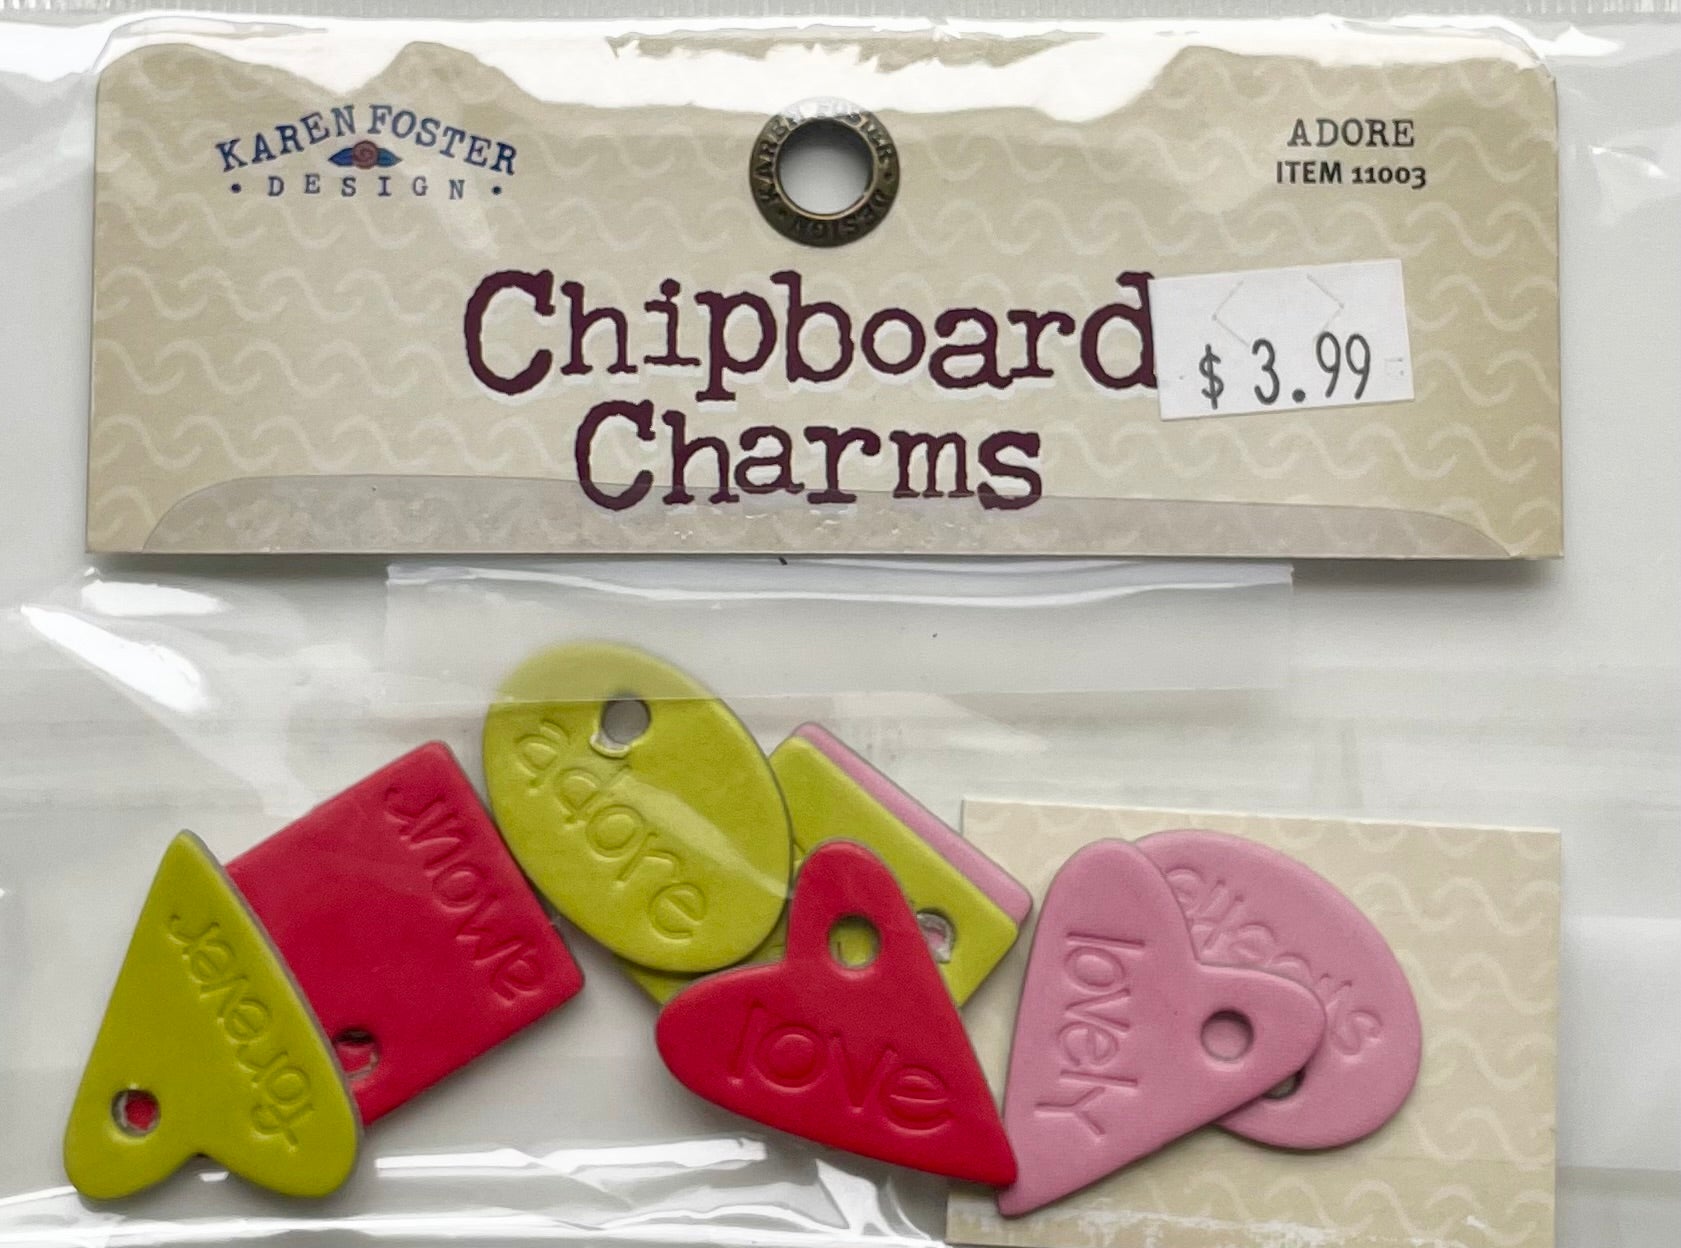 Adore Chipboard Charms